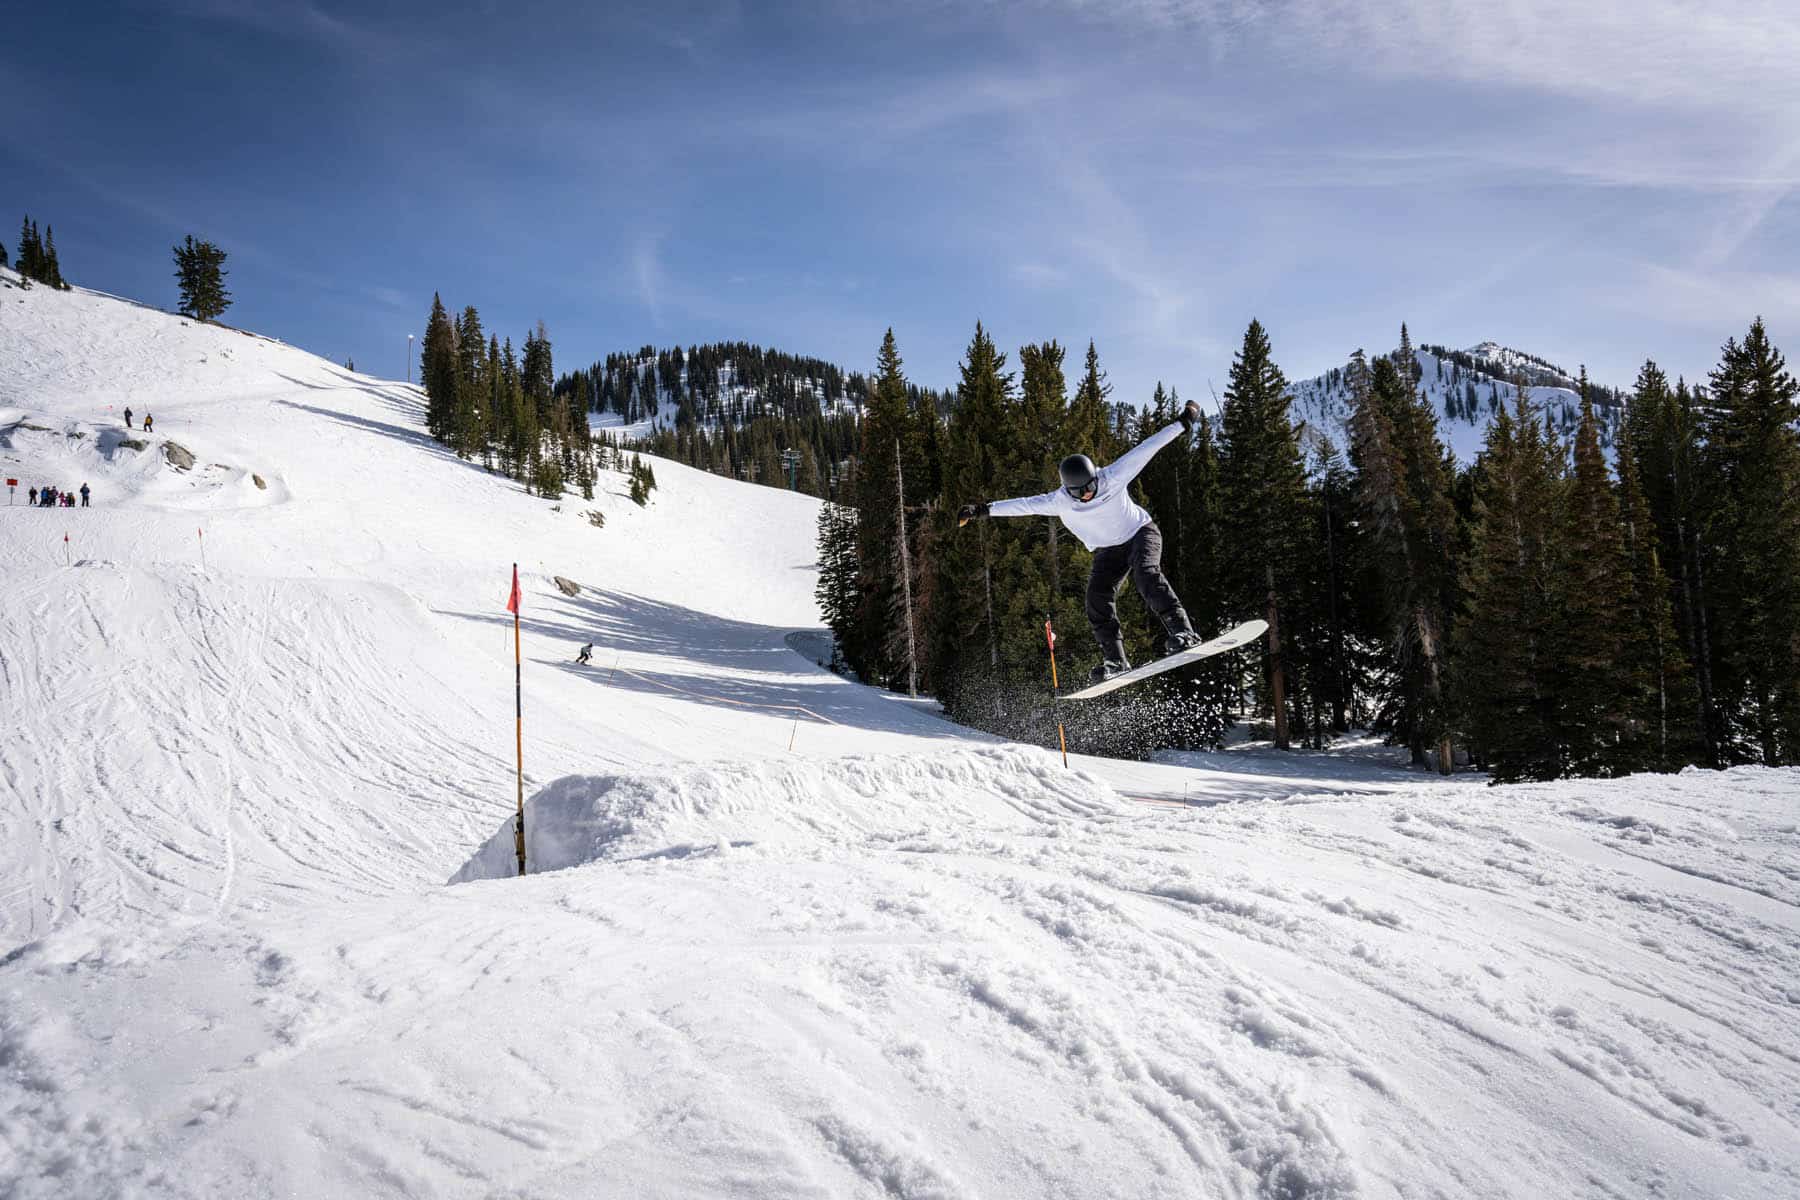 A snowboarder catches air in a daring mid-flight trick above a snowy ramp, with a backdrop of an audience and pine trees under the expansive blue sky, capturing the thrill and skill of snowboarding.